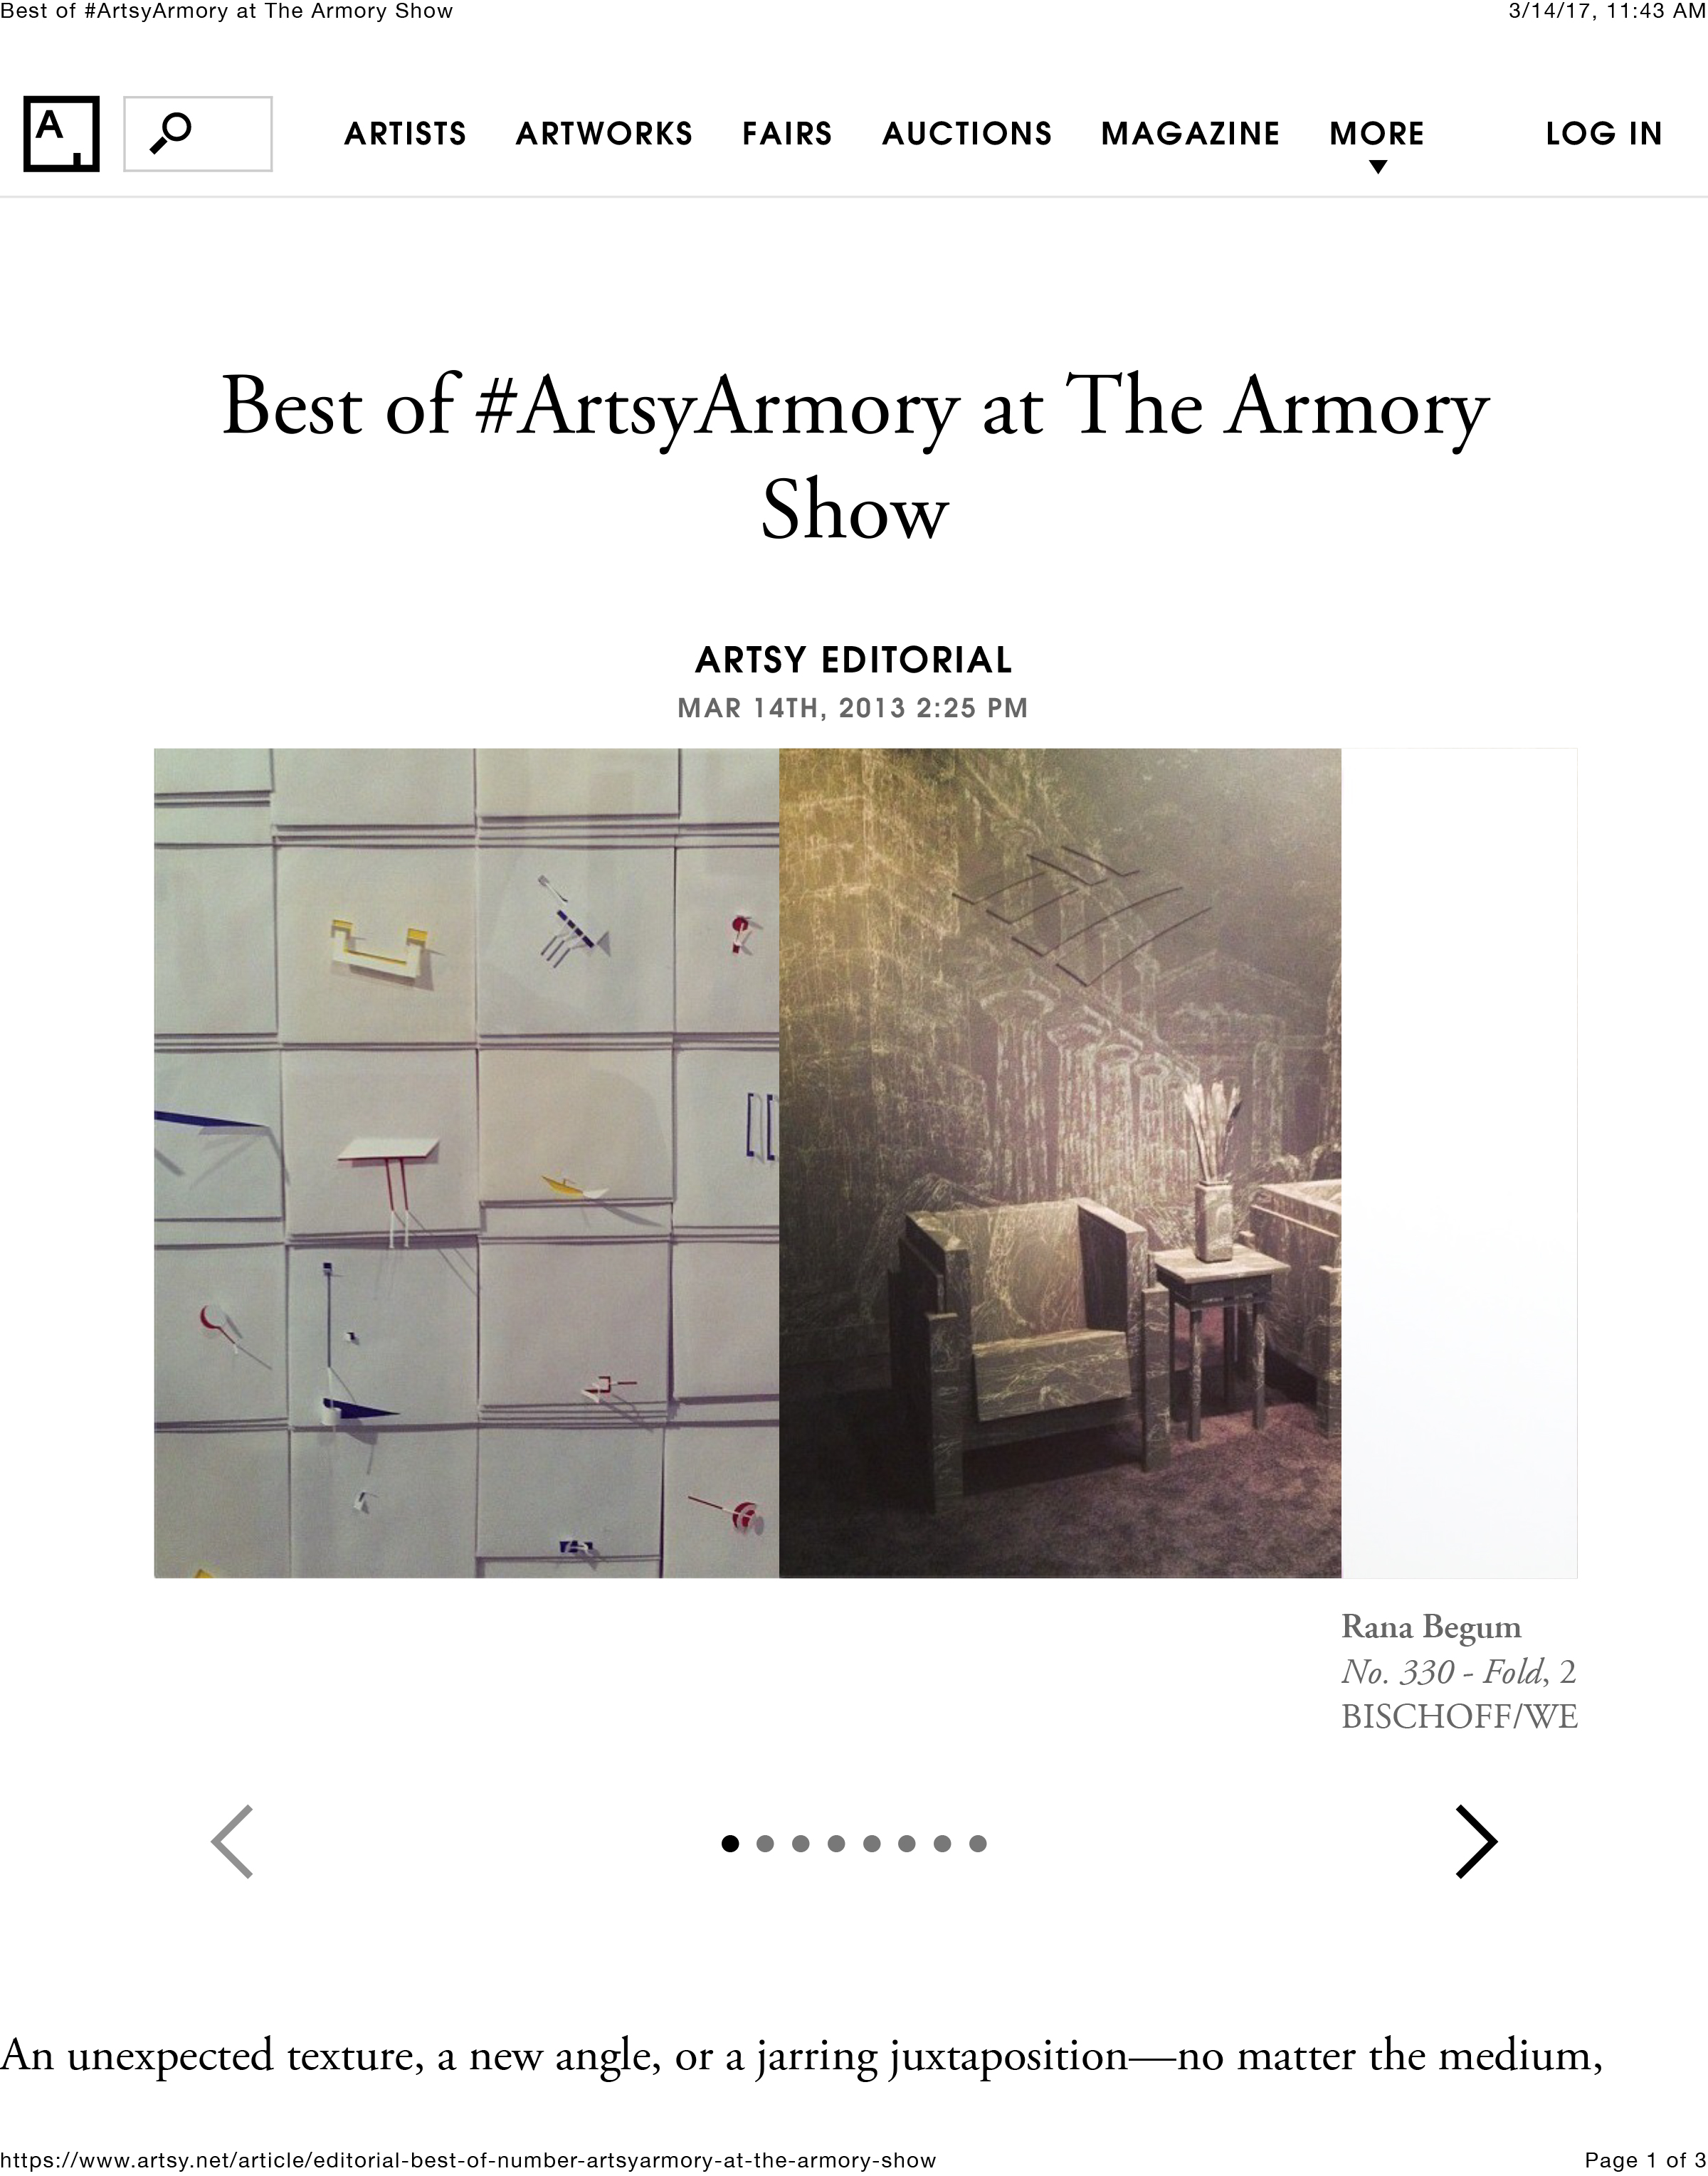 Artsy Best of the Armory Show